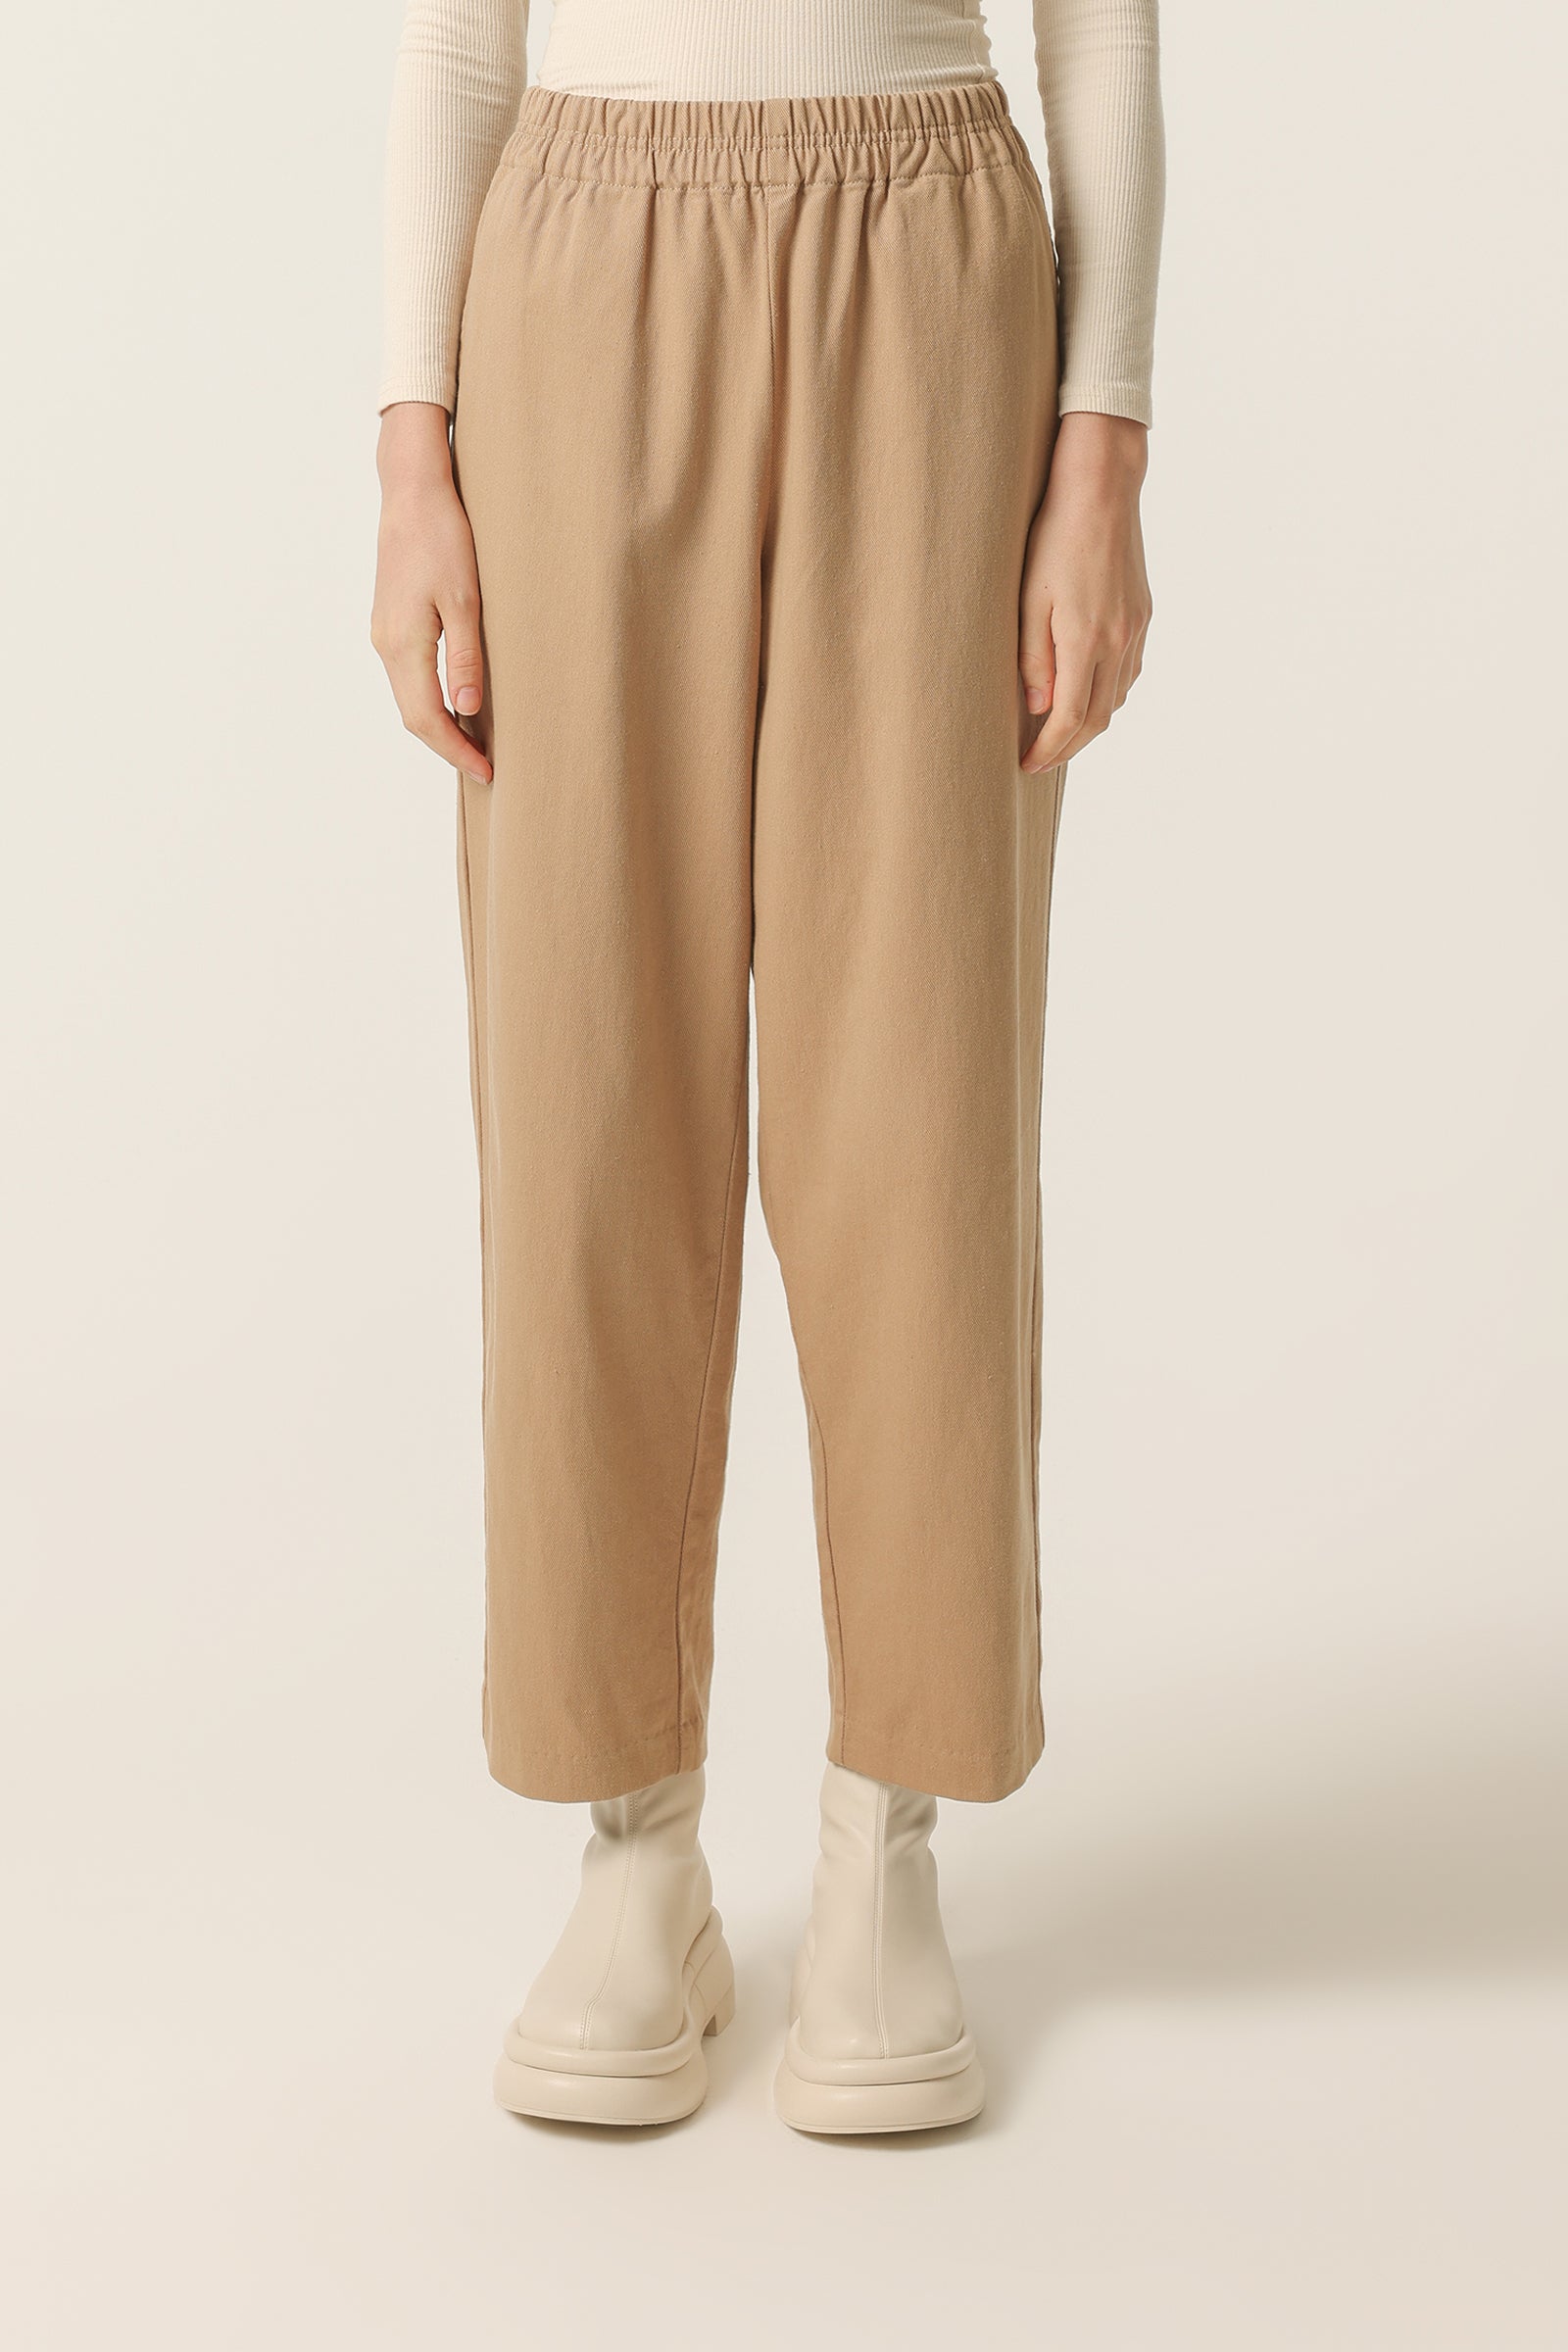 Nude Lucy Denver Pant In a Beige Sepia Colour